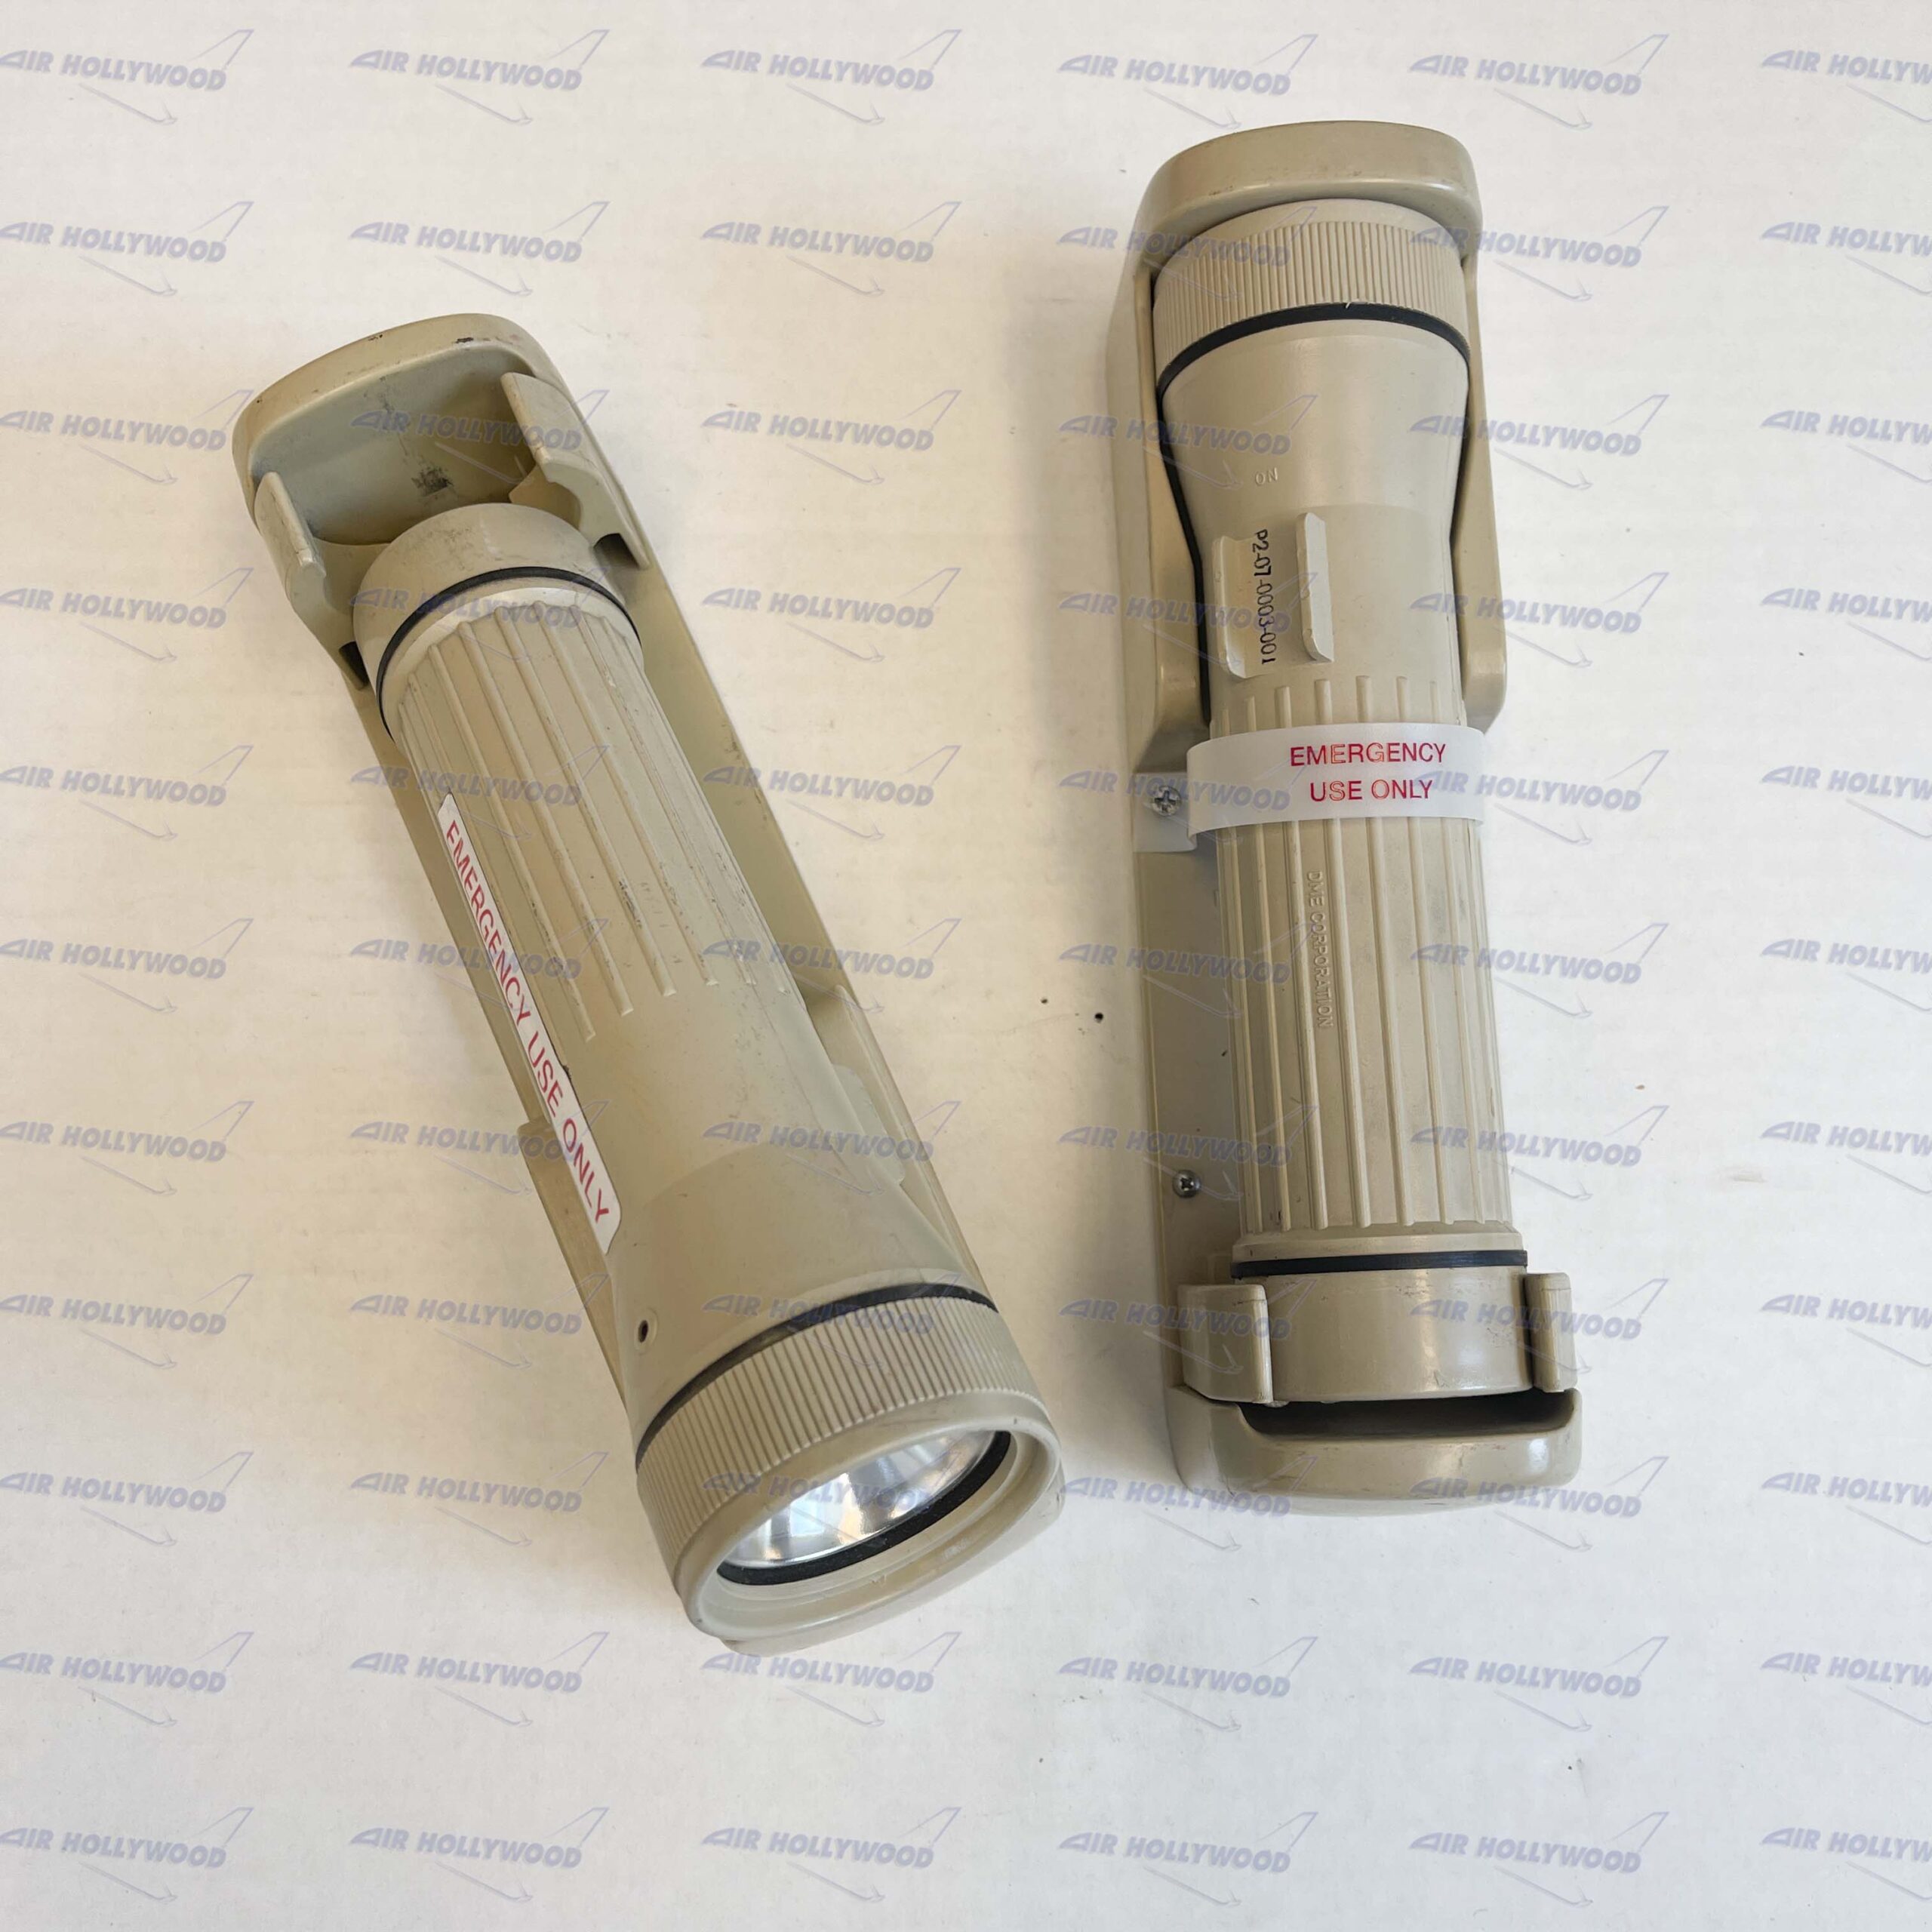 https://airhollywoodprops.com/wp-content/uploads/inflight-flashlight-scaled.jpg